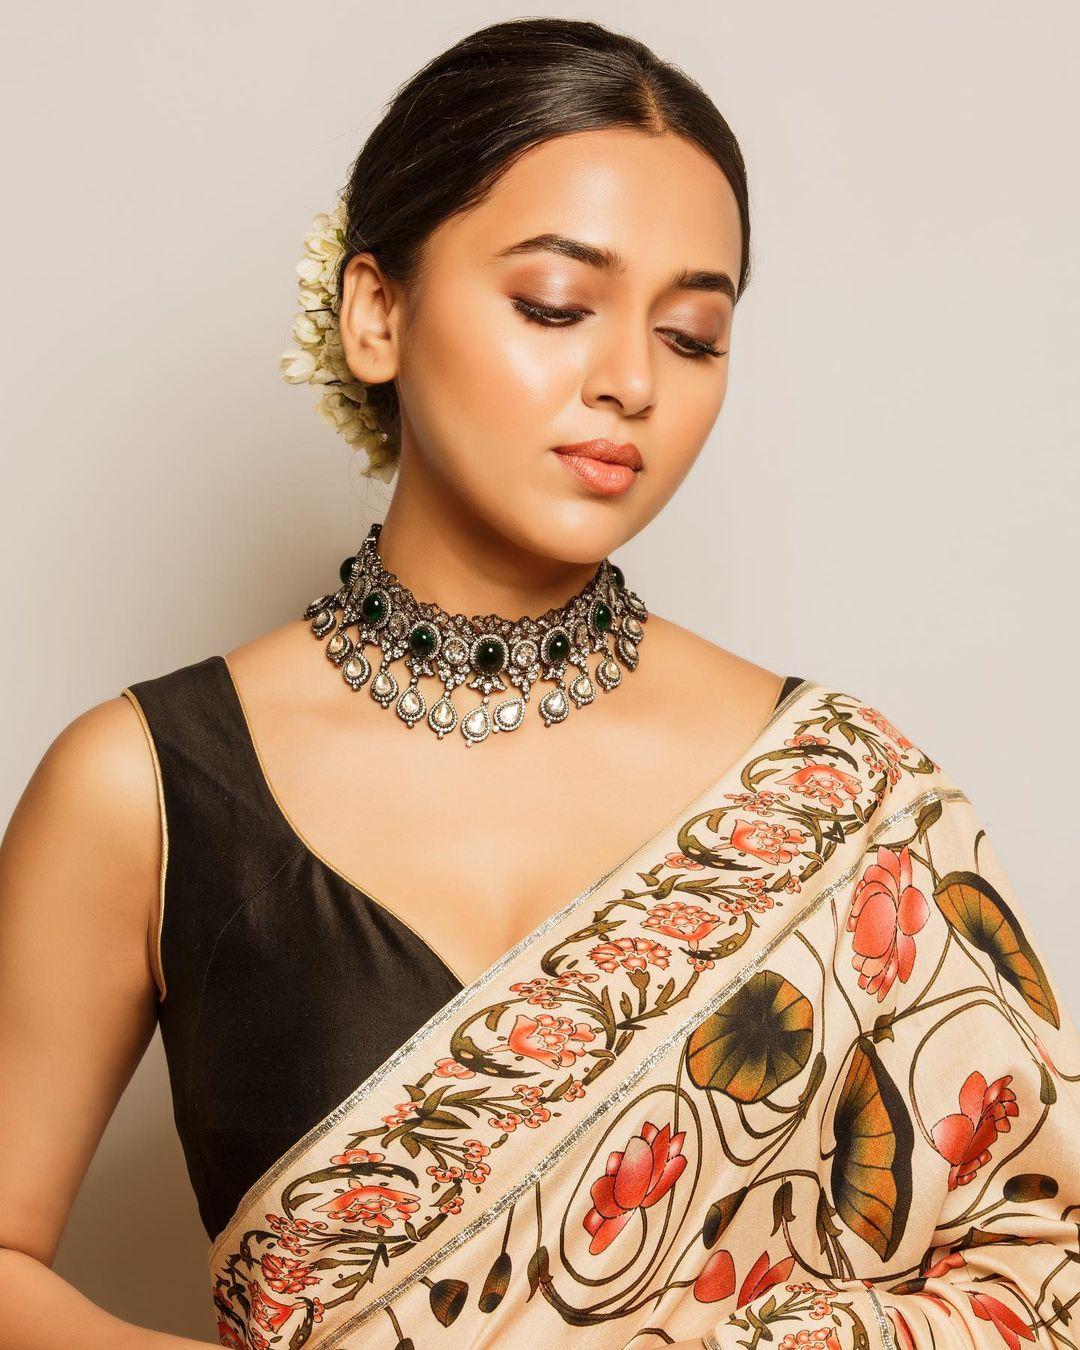 To elevate your look further, style your hair in a chic bun and put minimal nude makeup. Just for some extra masala, add an intricate necklace like Tejasswi, and you are ready to ace